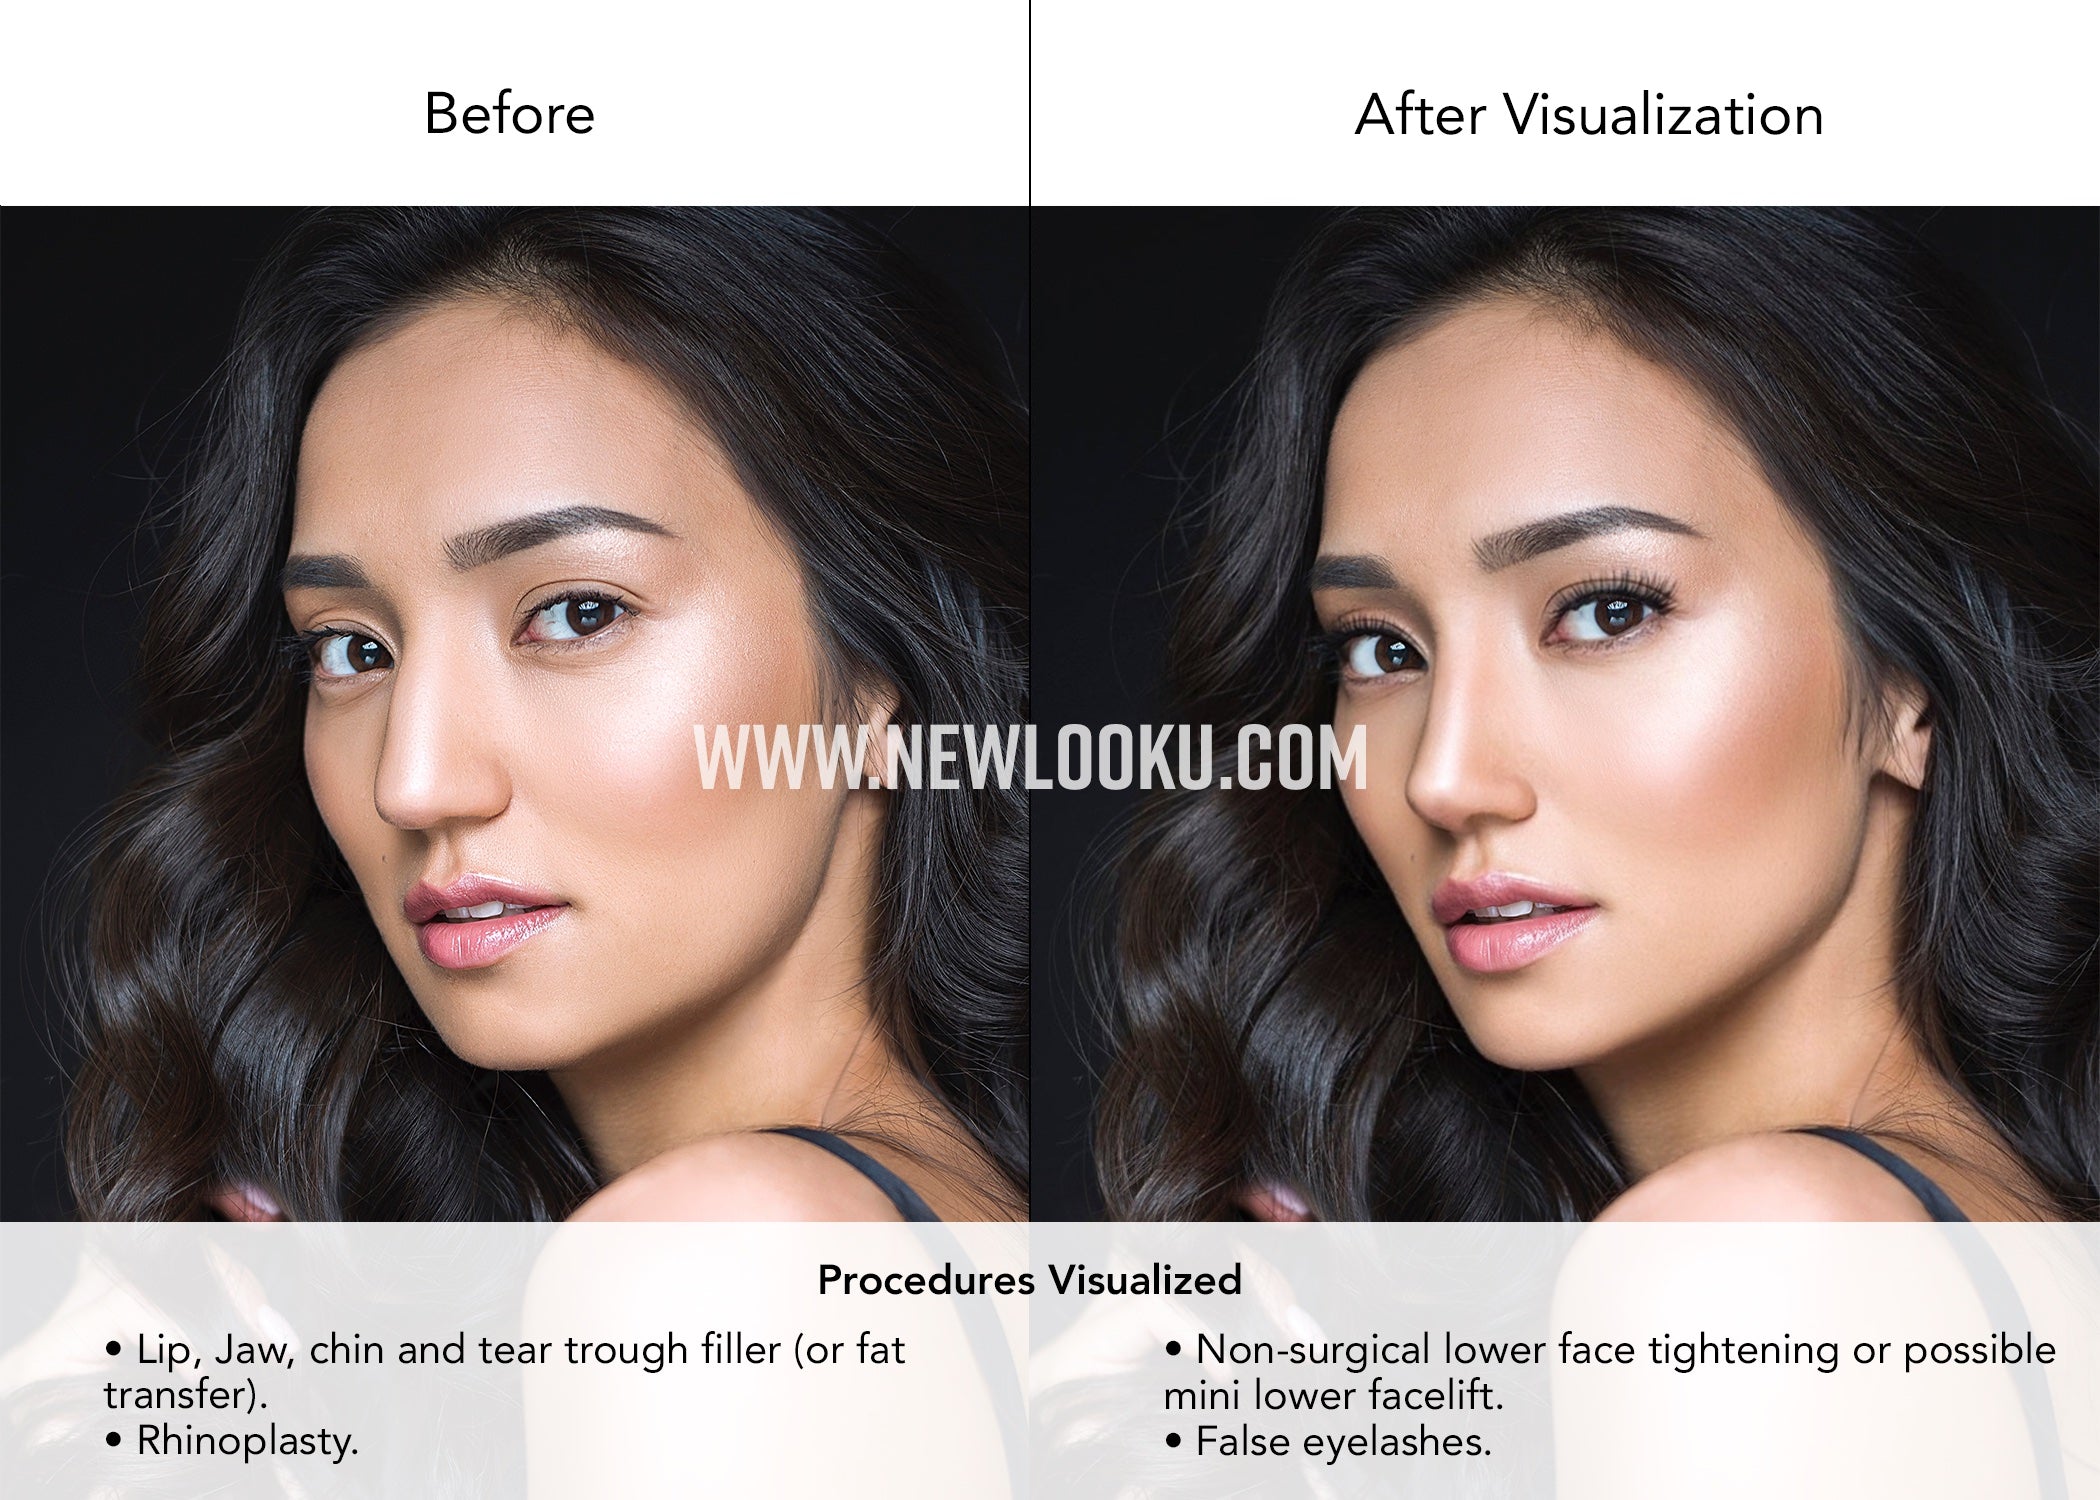 Female Plastic Surgery Visualization Before and After: Rhinoplasty. Lip, Jaw, chin and tear trough filler (or fat transfer). Non-surgical lower face tightening or possible mini lower facelift.